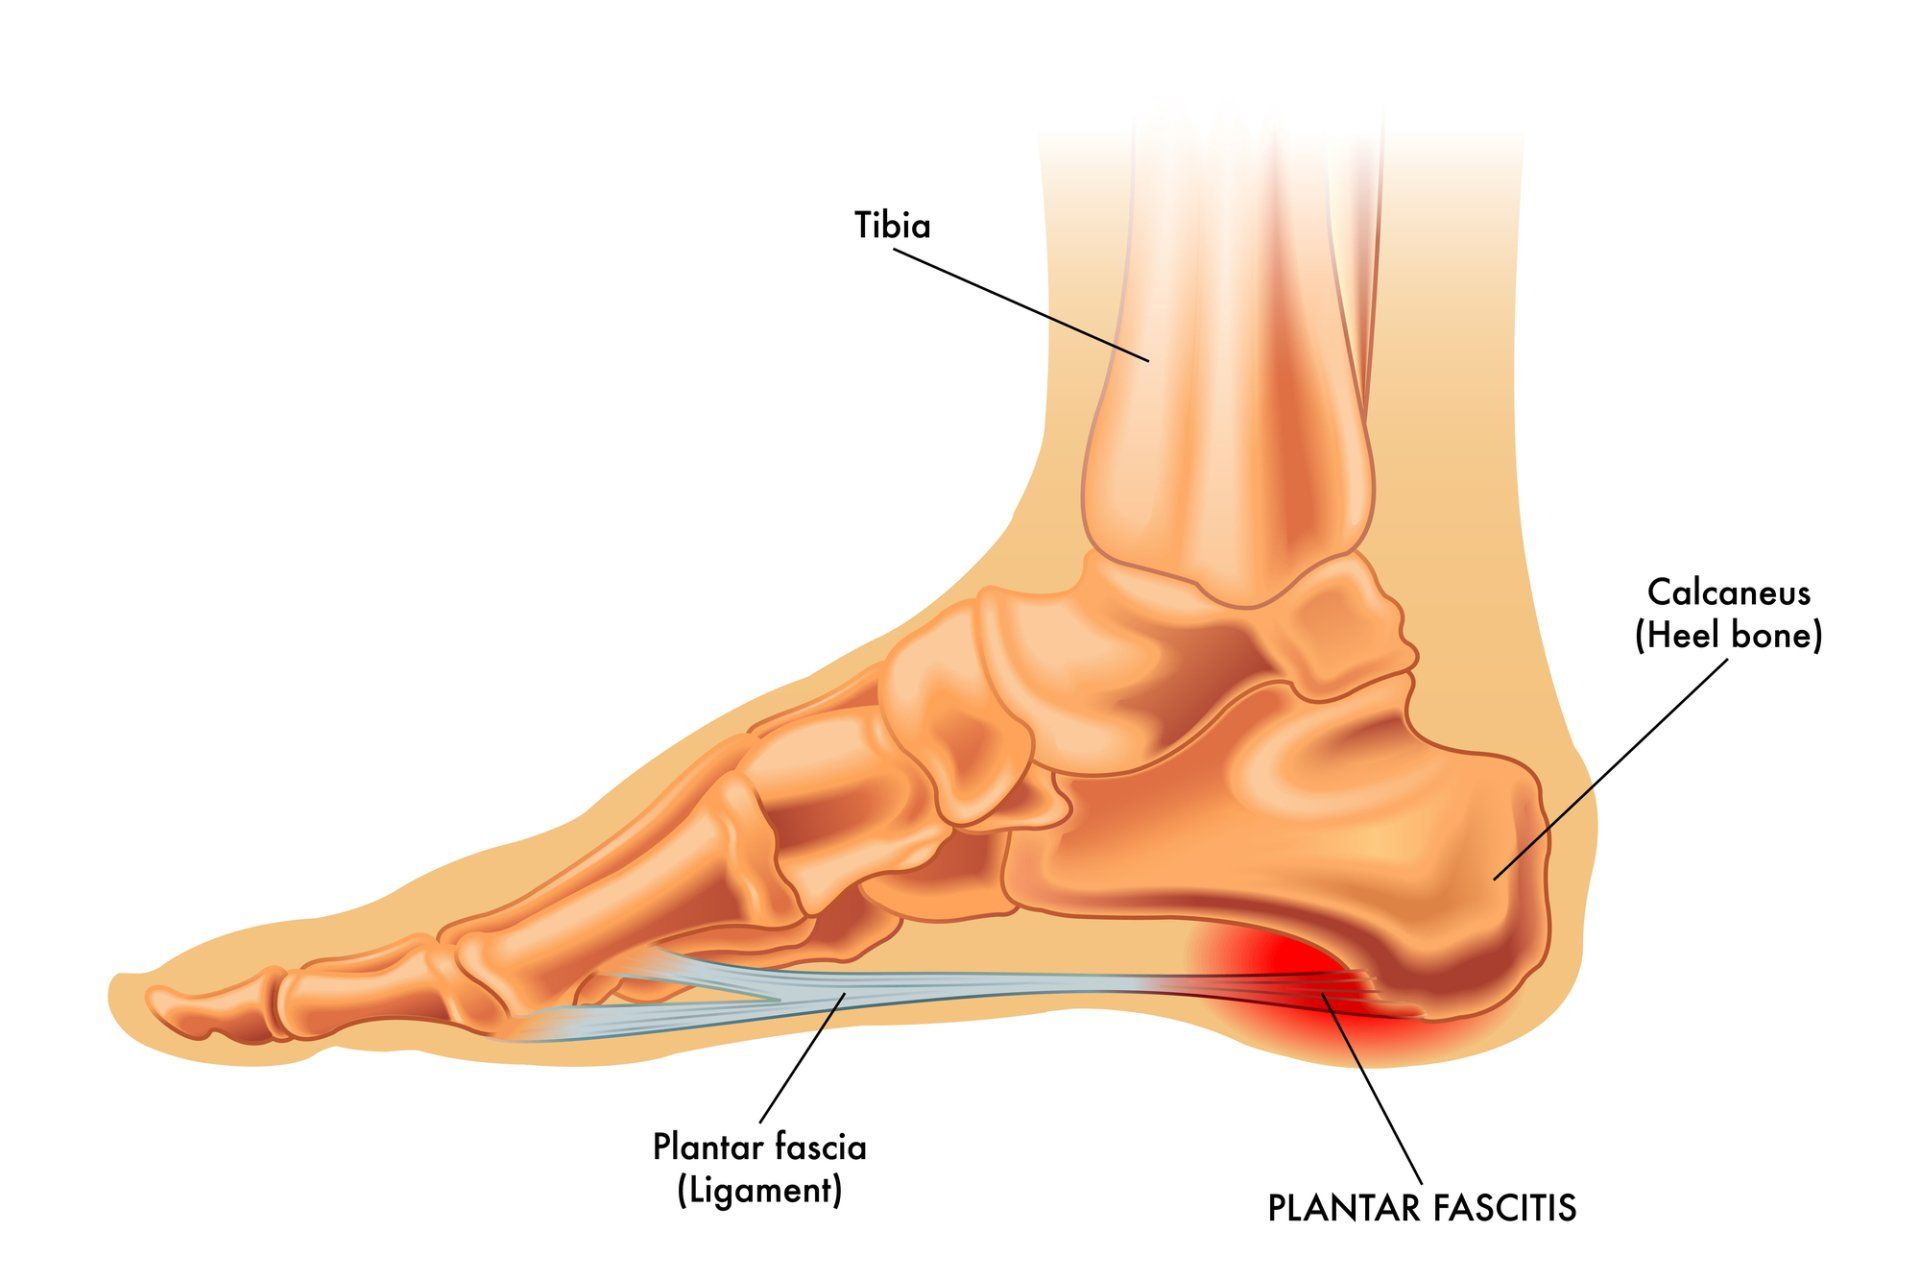 10 Common Foot Pain Causes & Solutions